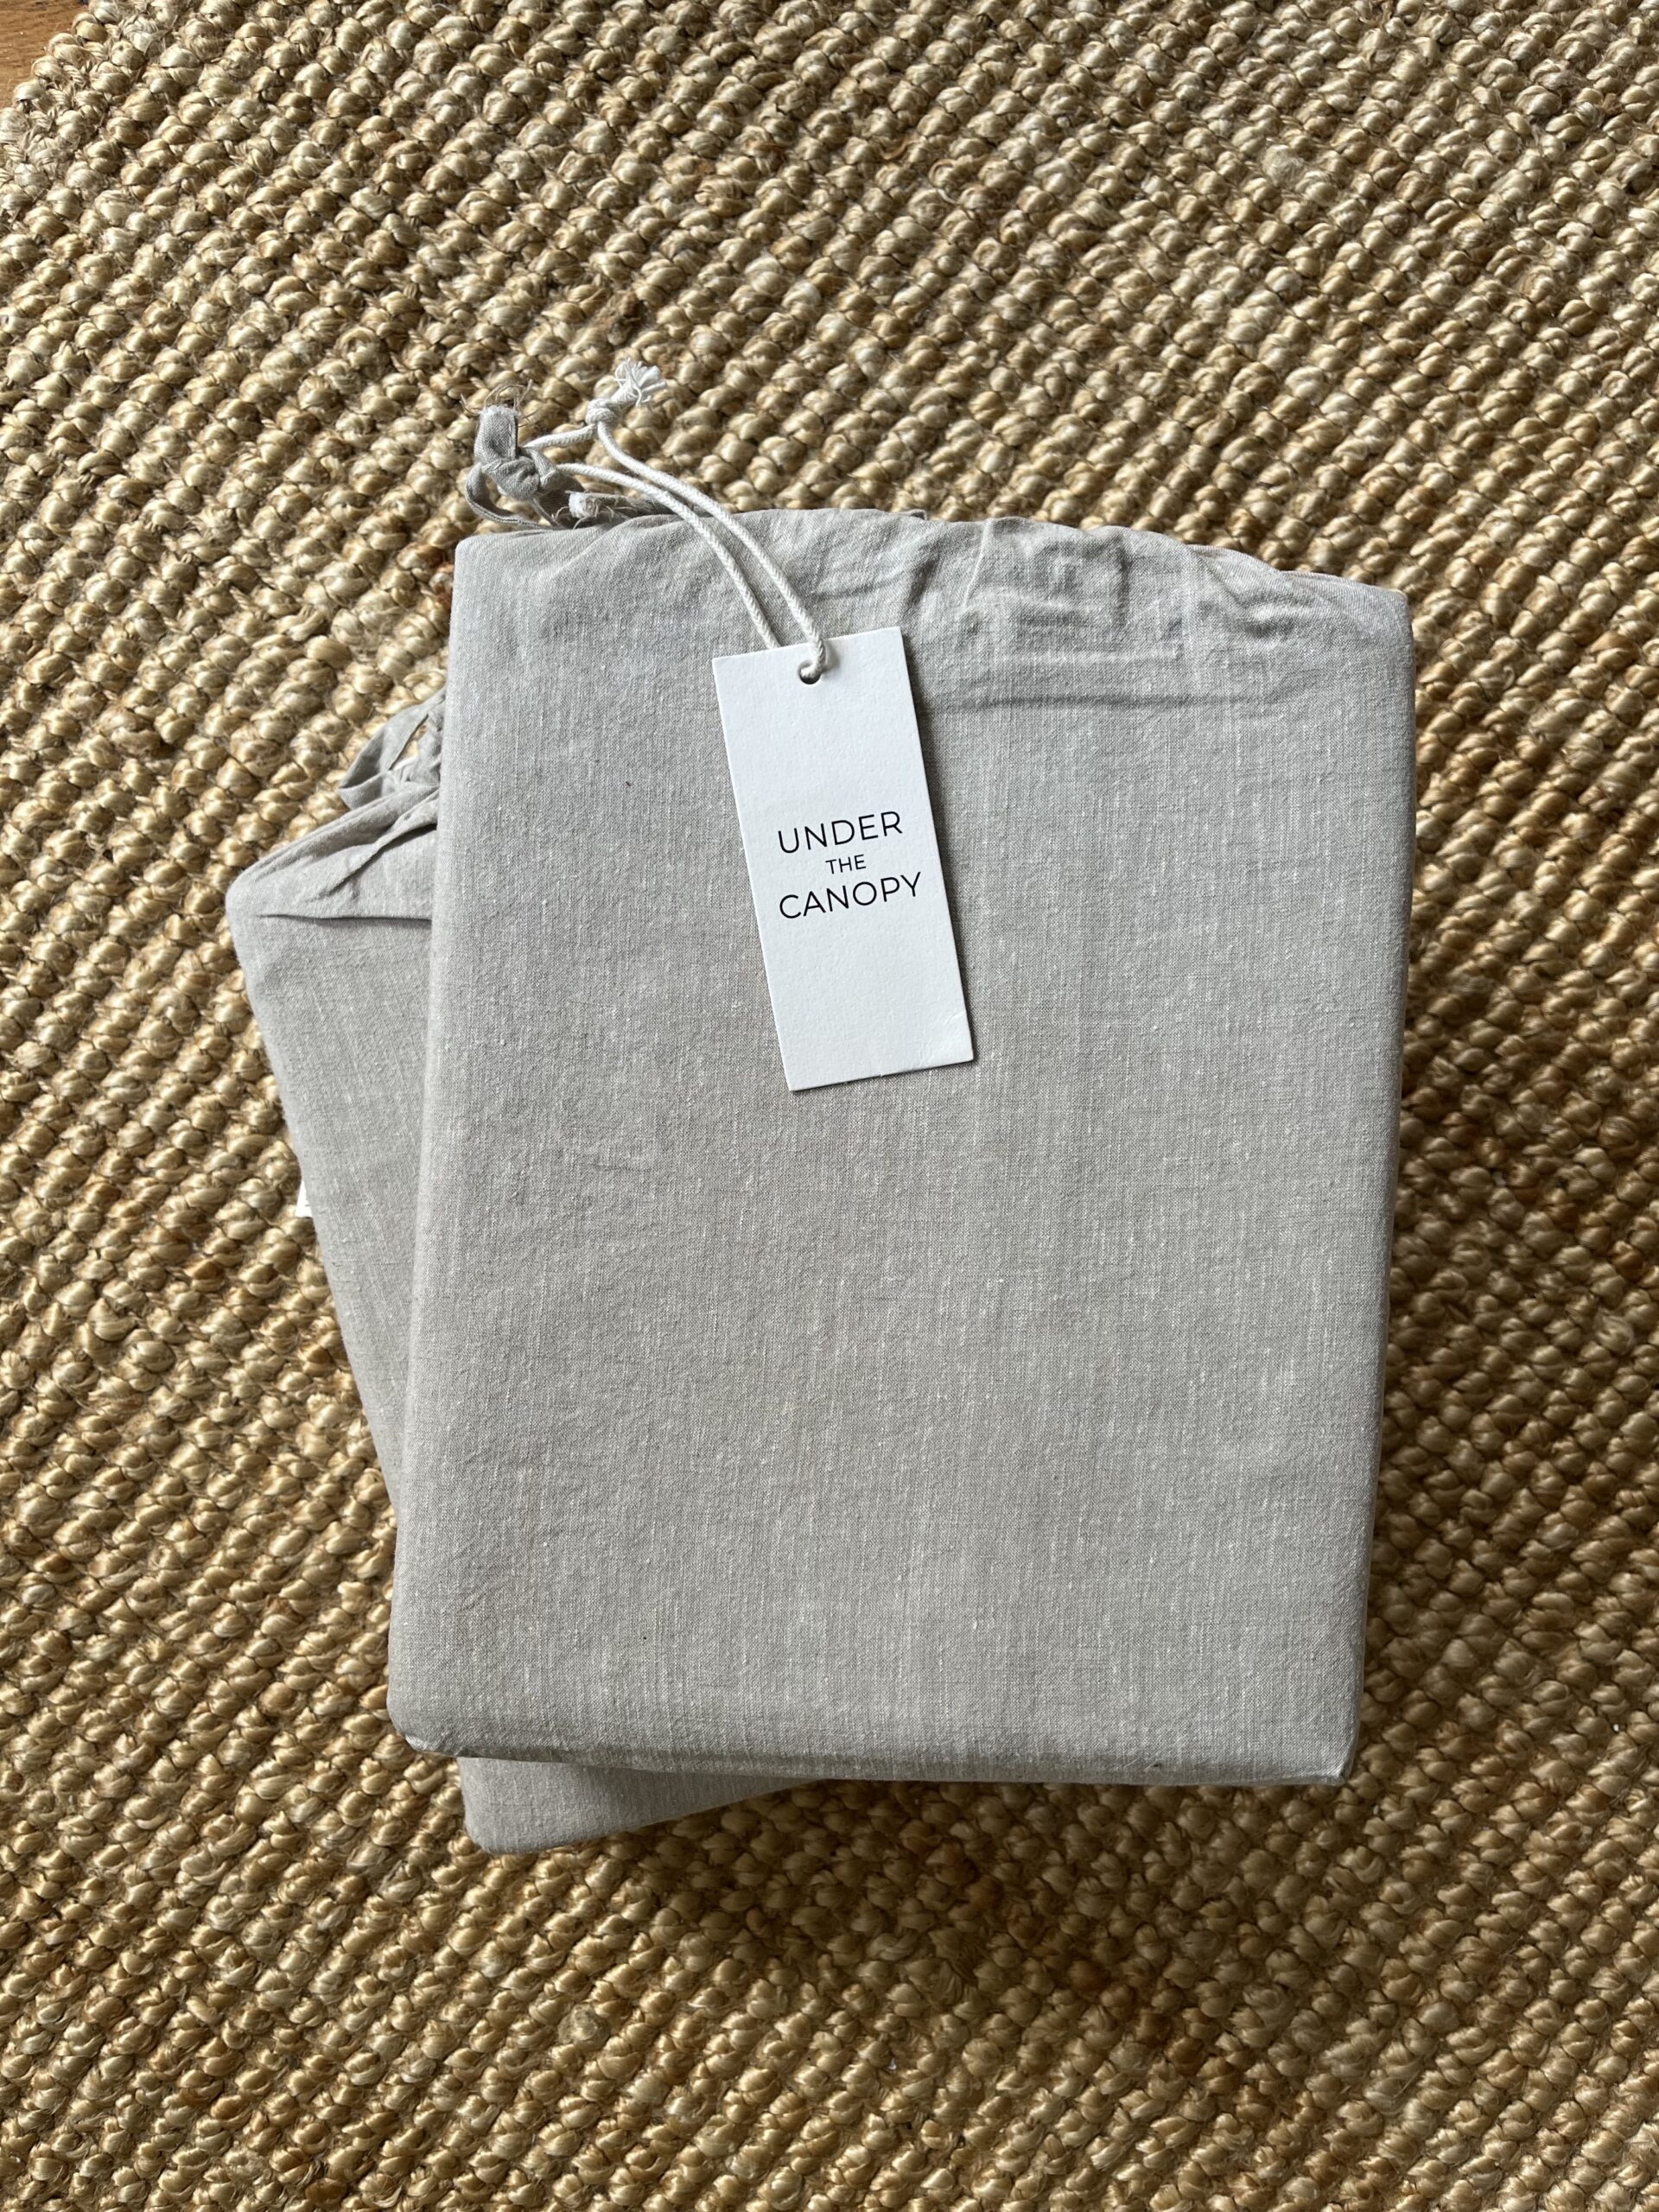 A folded set of grey bed sheets with a tag labeled "Under the Canopy" placed on a woven, beige mat.